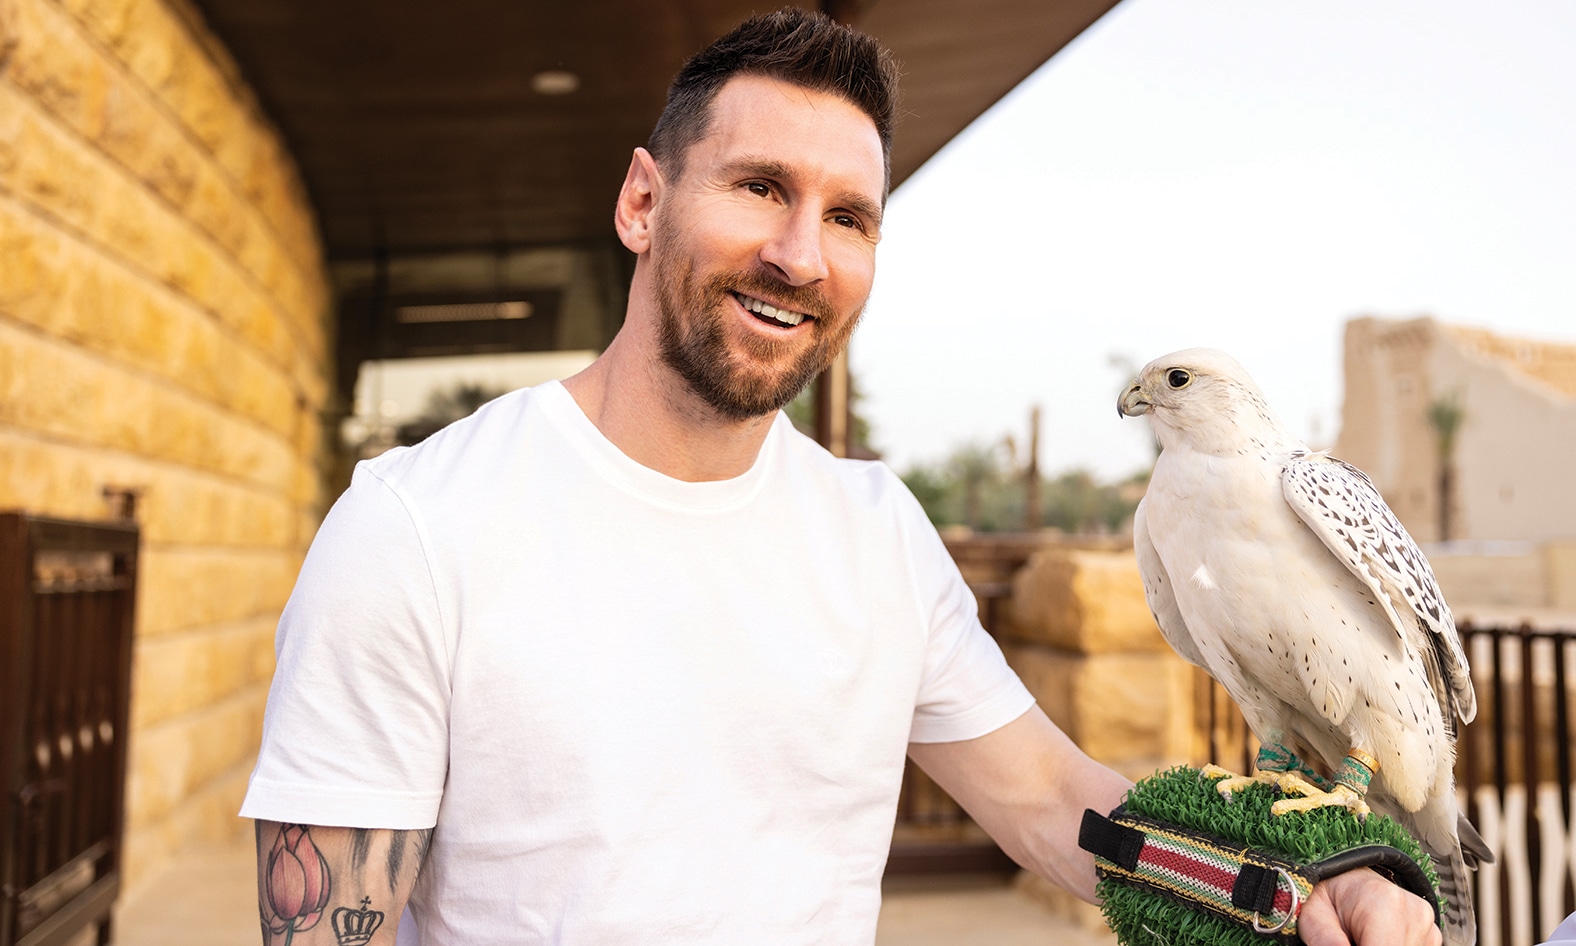 RIYADH: This handout picture provided by the Saudi Tourism Authority shows Argentina’s forward Lionel Messi holding a falcon in Riyadh. - AFP